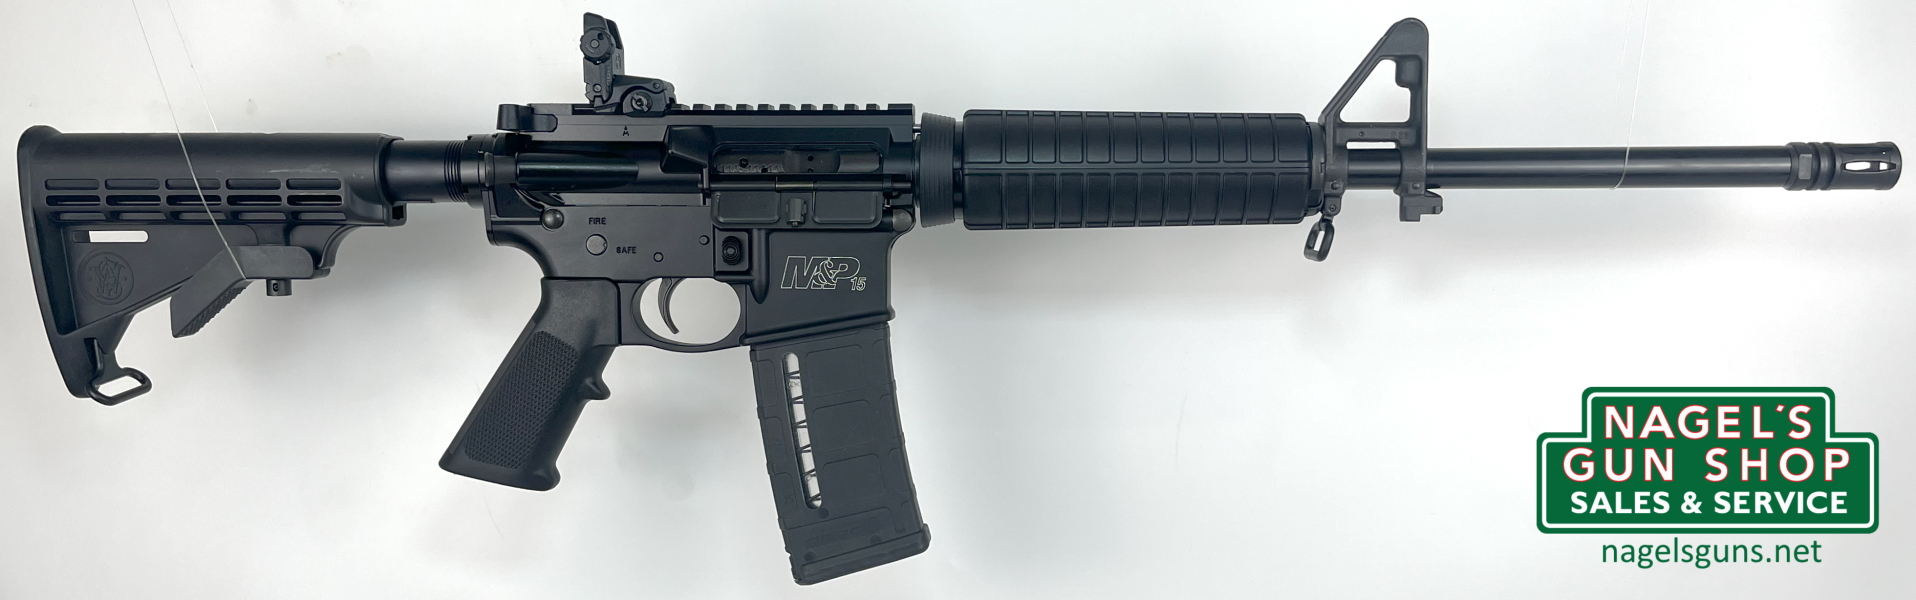 Smith & Wesson M&P15 5.56mm Rifle